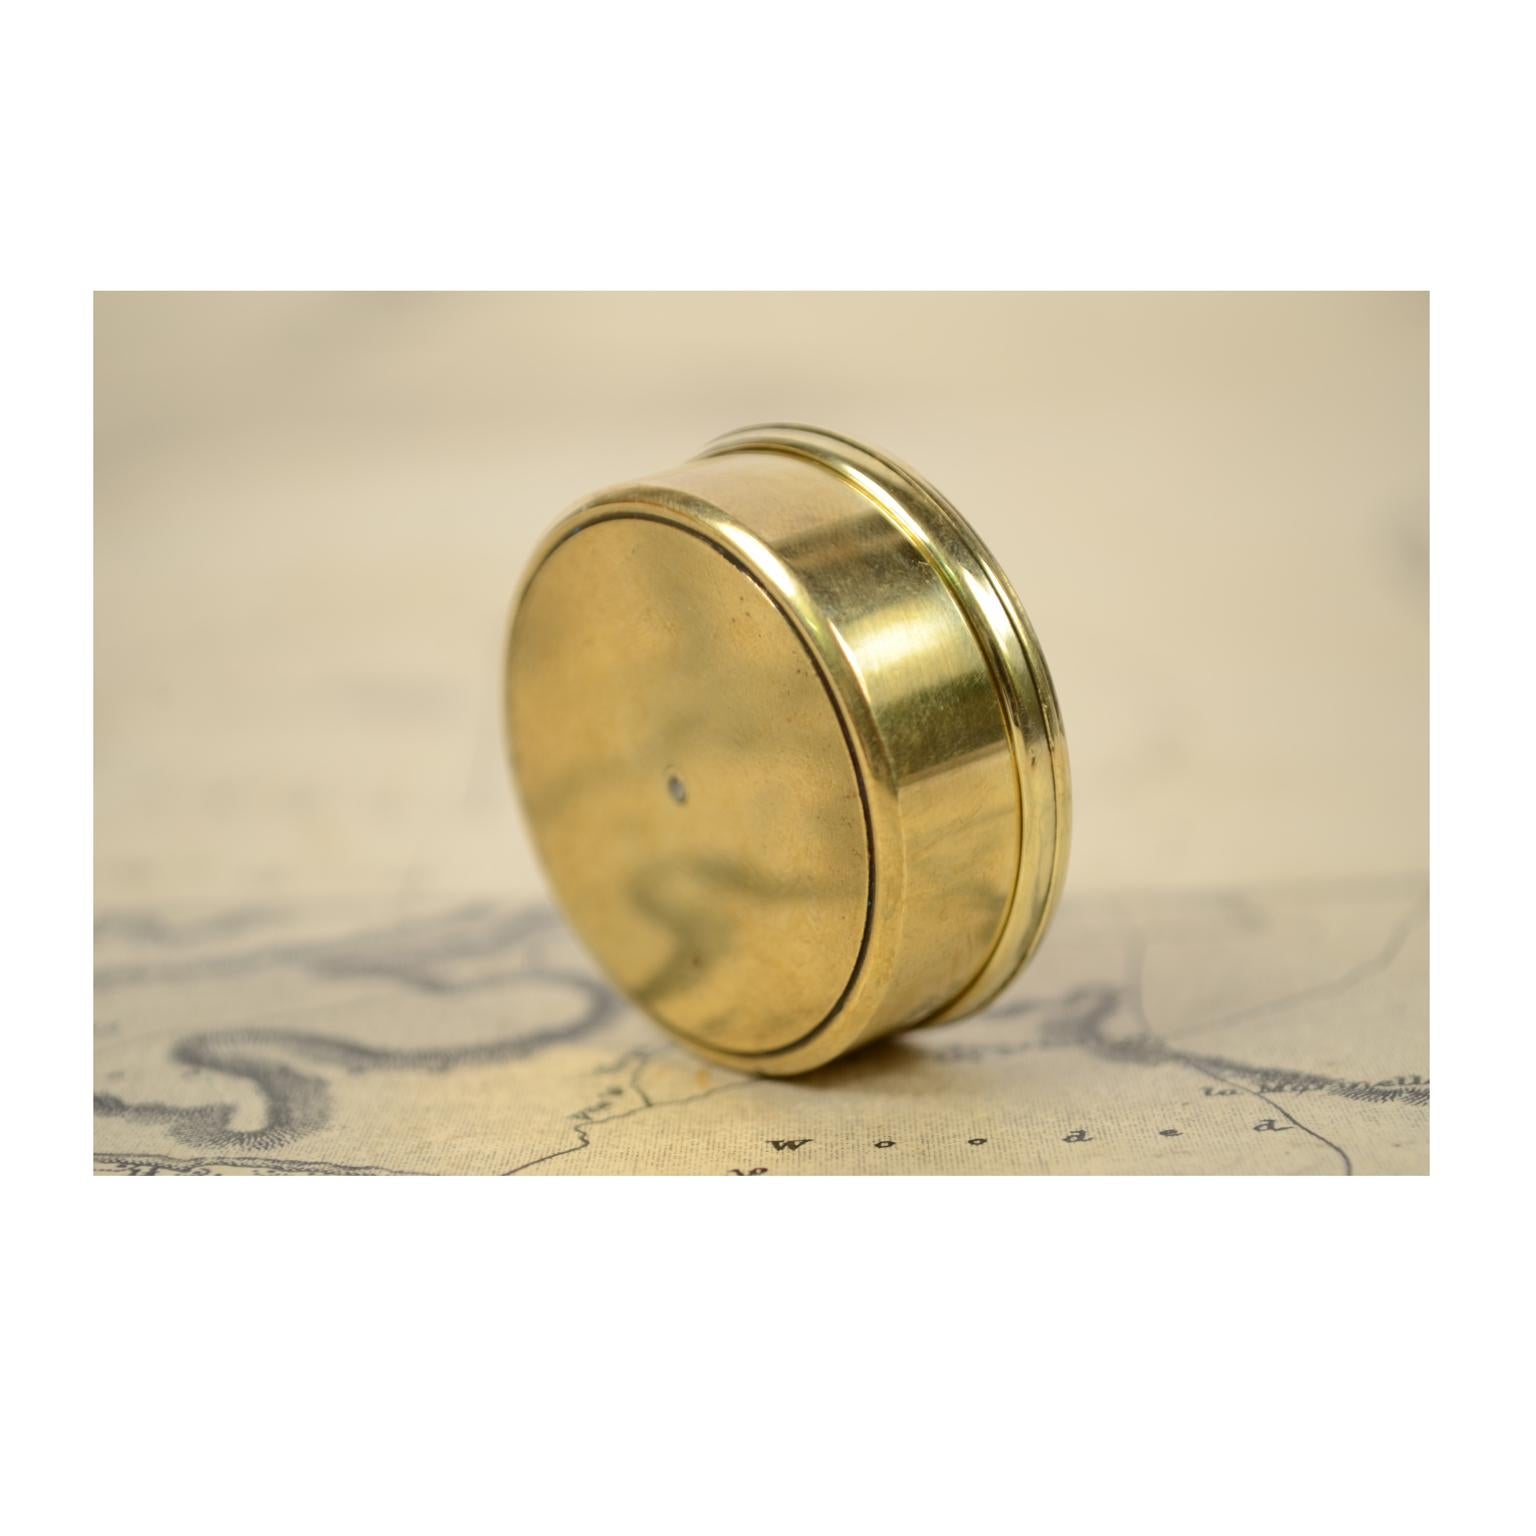 Dry Pocket Nautical Compass Placed in Its Original Box Made of Turned Brass 3